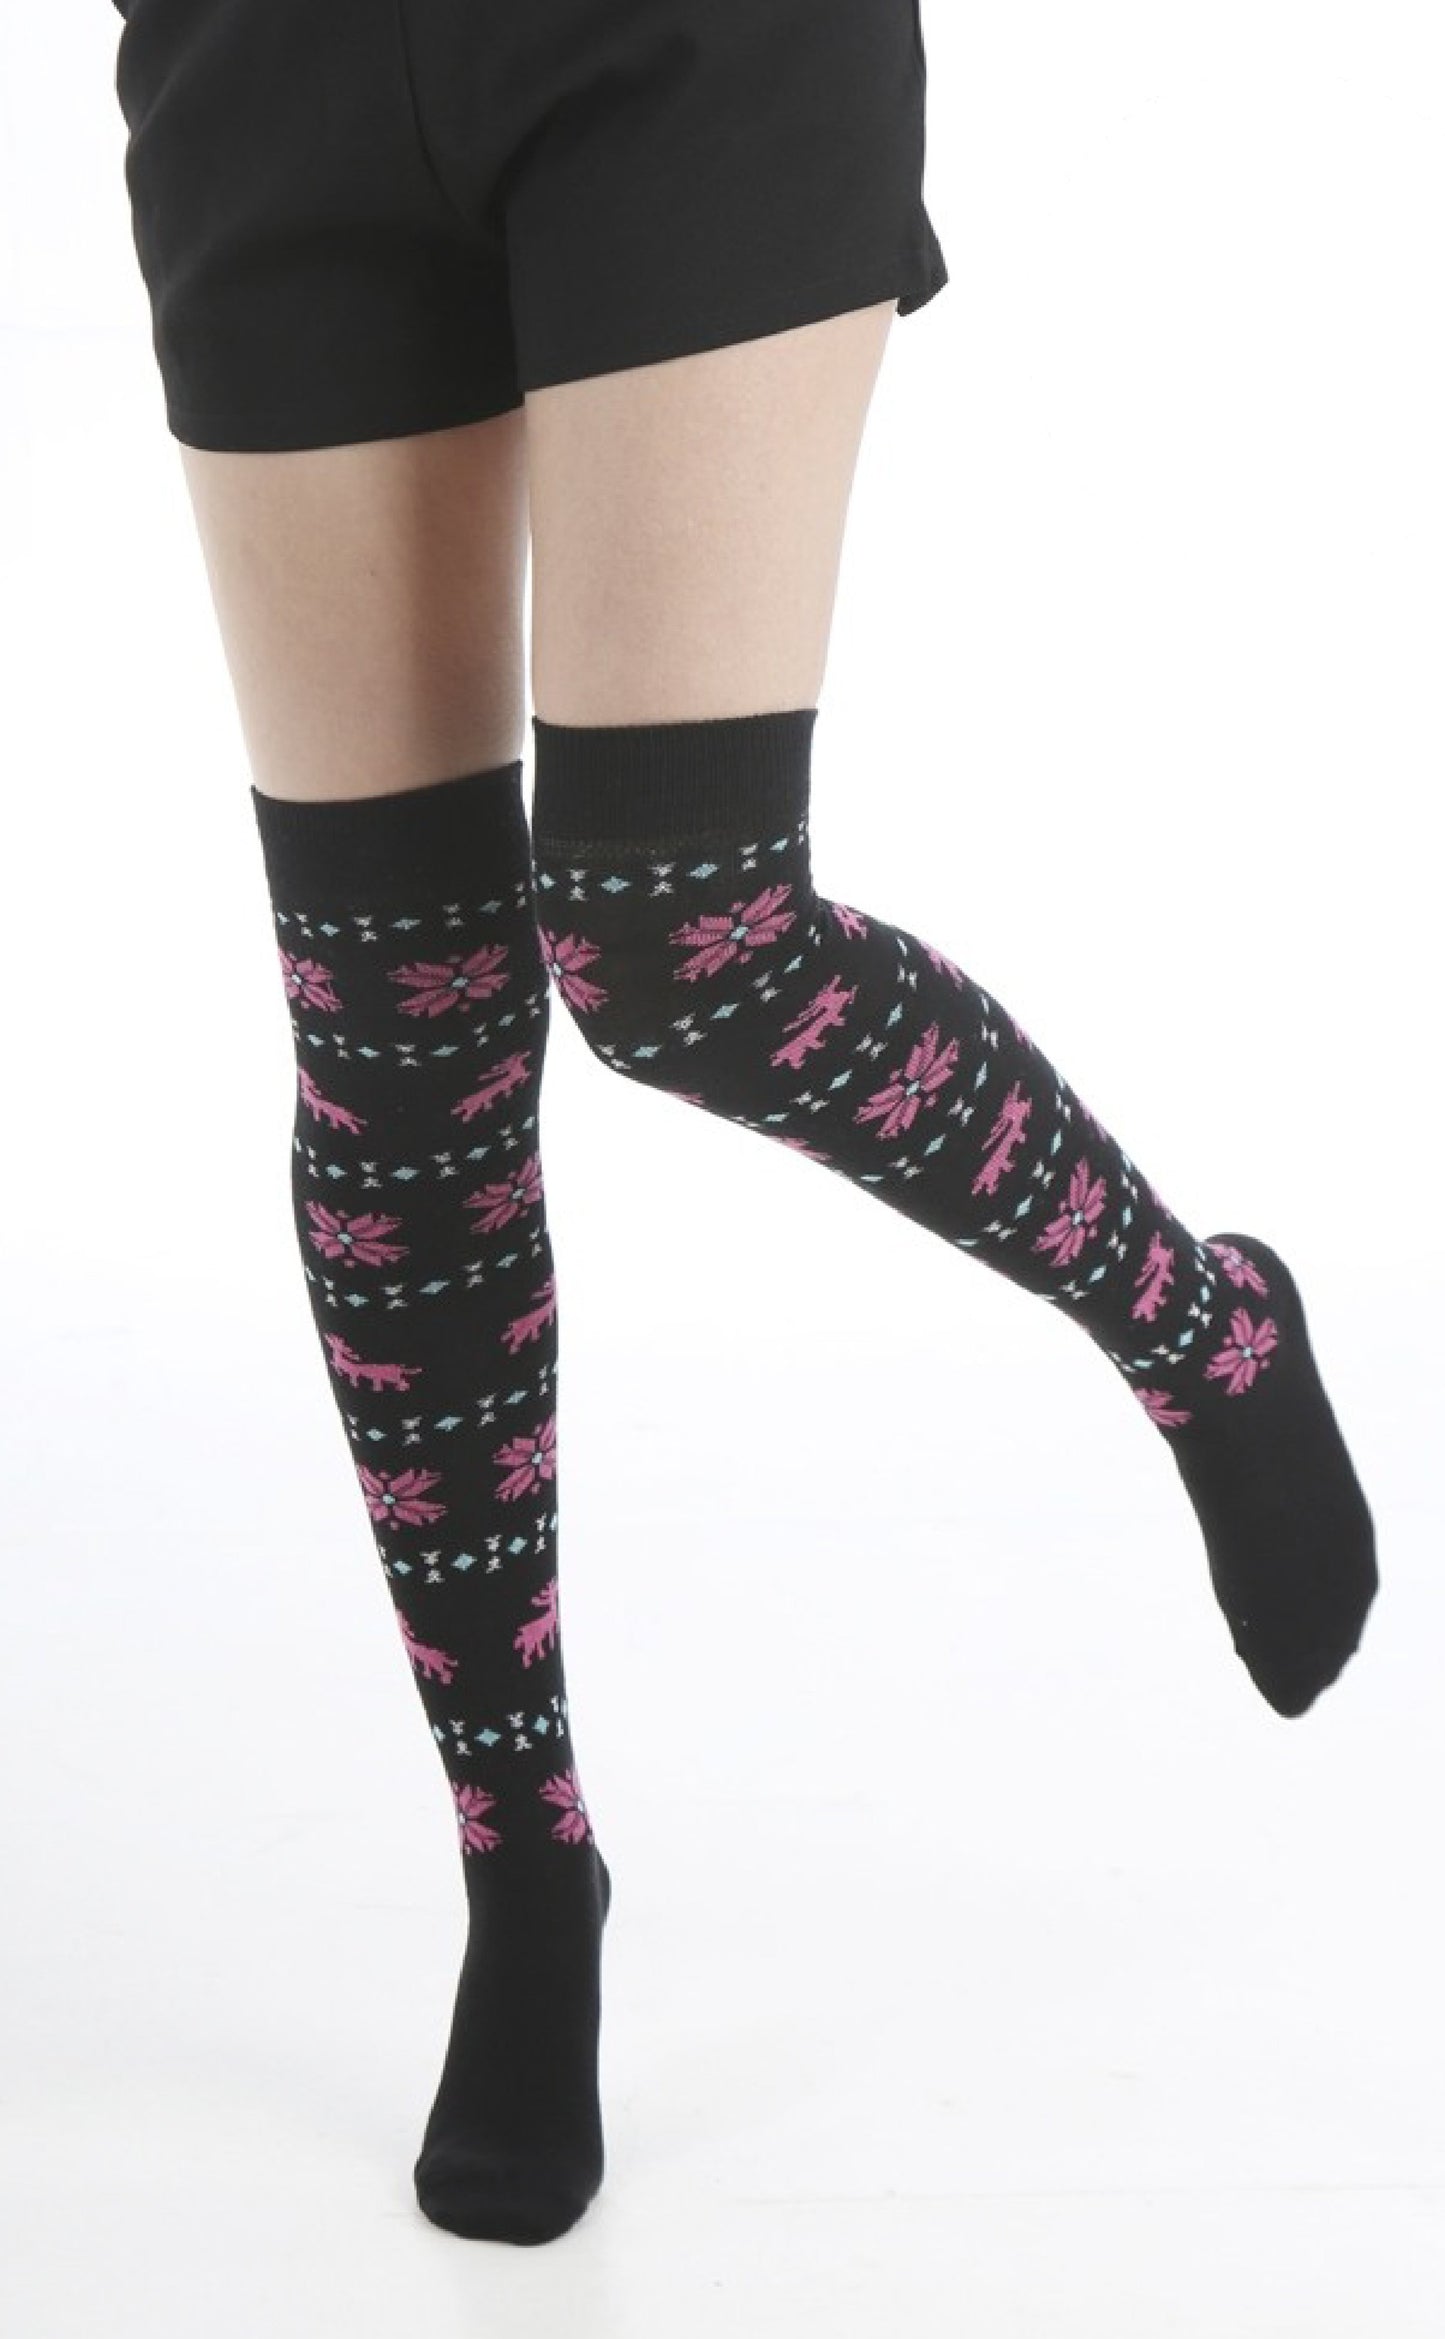 Pamela Mann Xmas Reindeer Over-Knee Socks - Christmas over the knee cotton socks with a fairisle style pattern of reindeers, snowflakes and diamond shapes. Available in black and pink